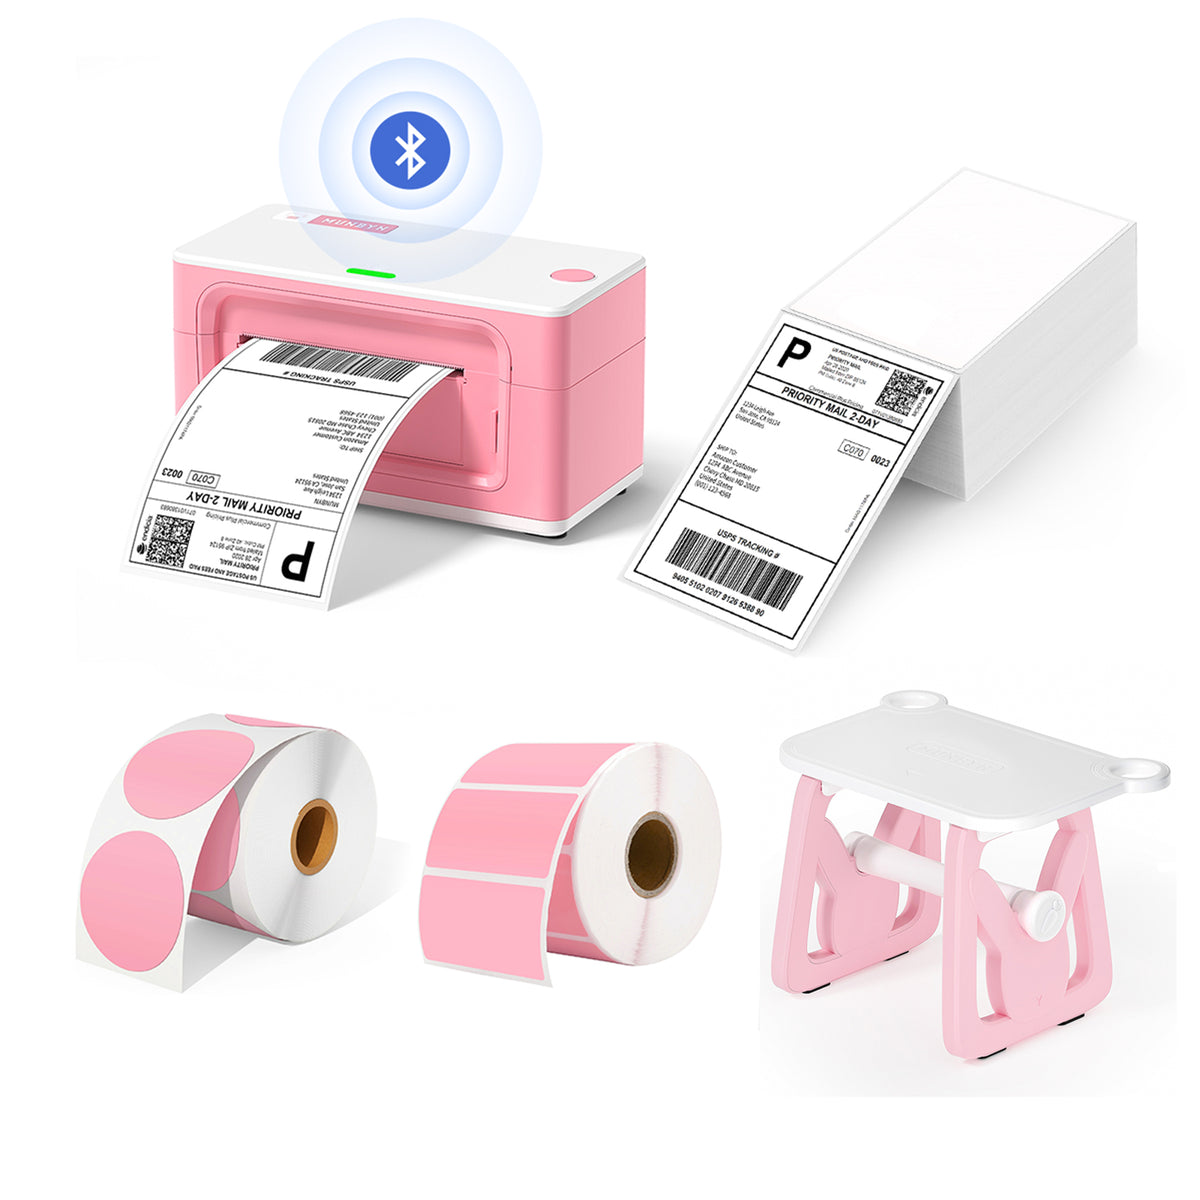 The bundle includes a pink Bluetooth thermal printer, a pink 3-in-1 label holder, one stack of shipping labels, and two rolls of pink thermal labels.